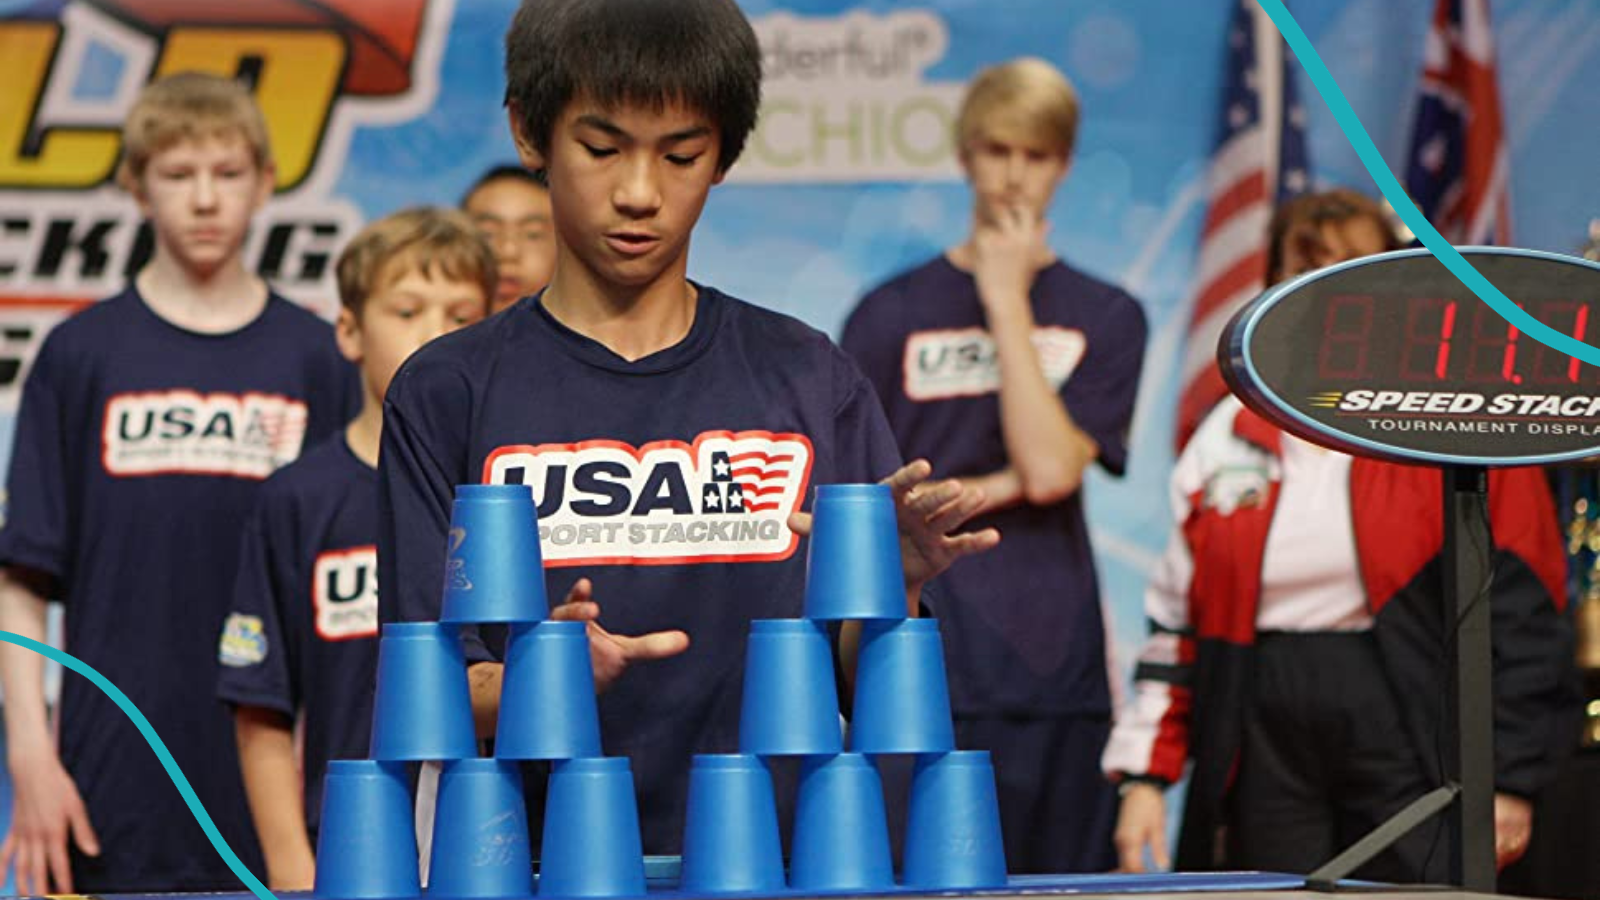 Competitors stacking pyramids of blue plastic cups in a sport stacking competition